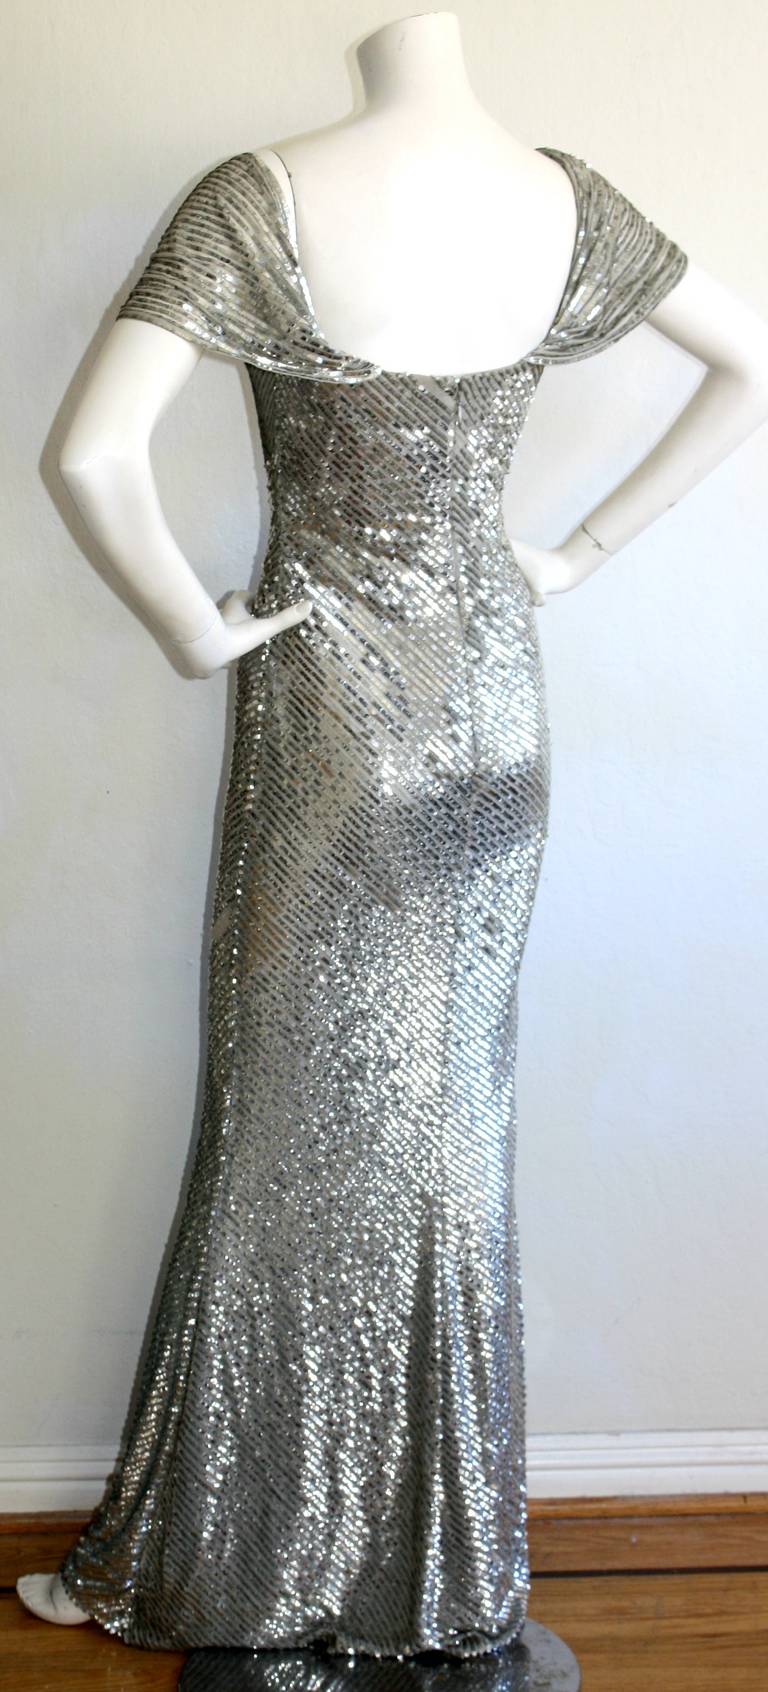 Bill Blass Haute Couture Silver Sequin Vintage Mermaid Gown New w/ Tags $7, 250 4